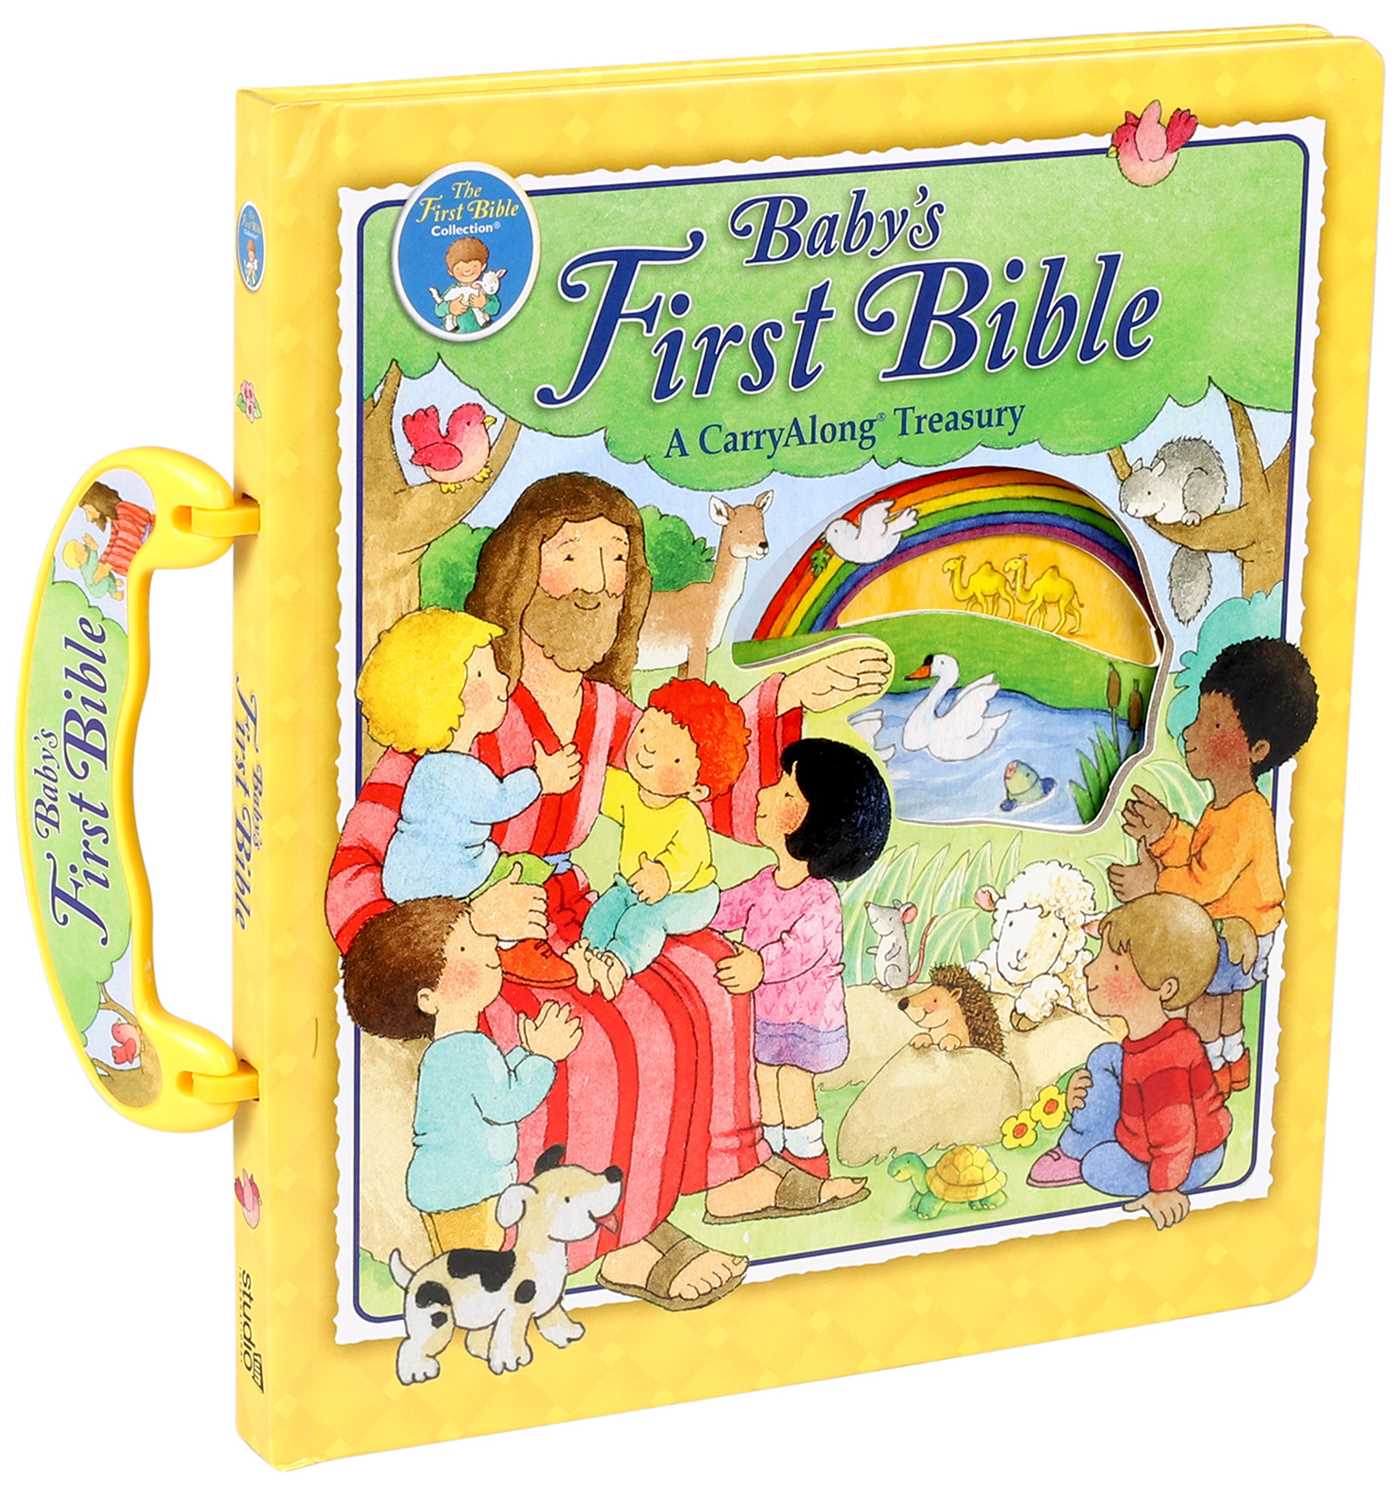 'Baby's First Bible' CarryAlong Book